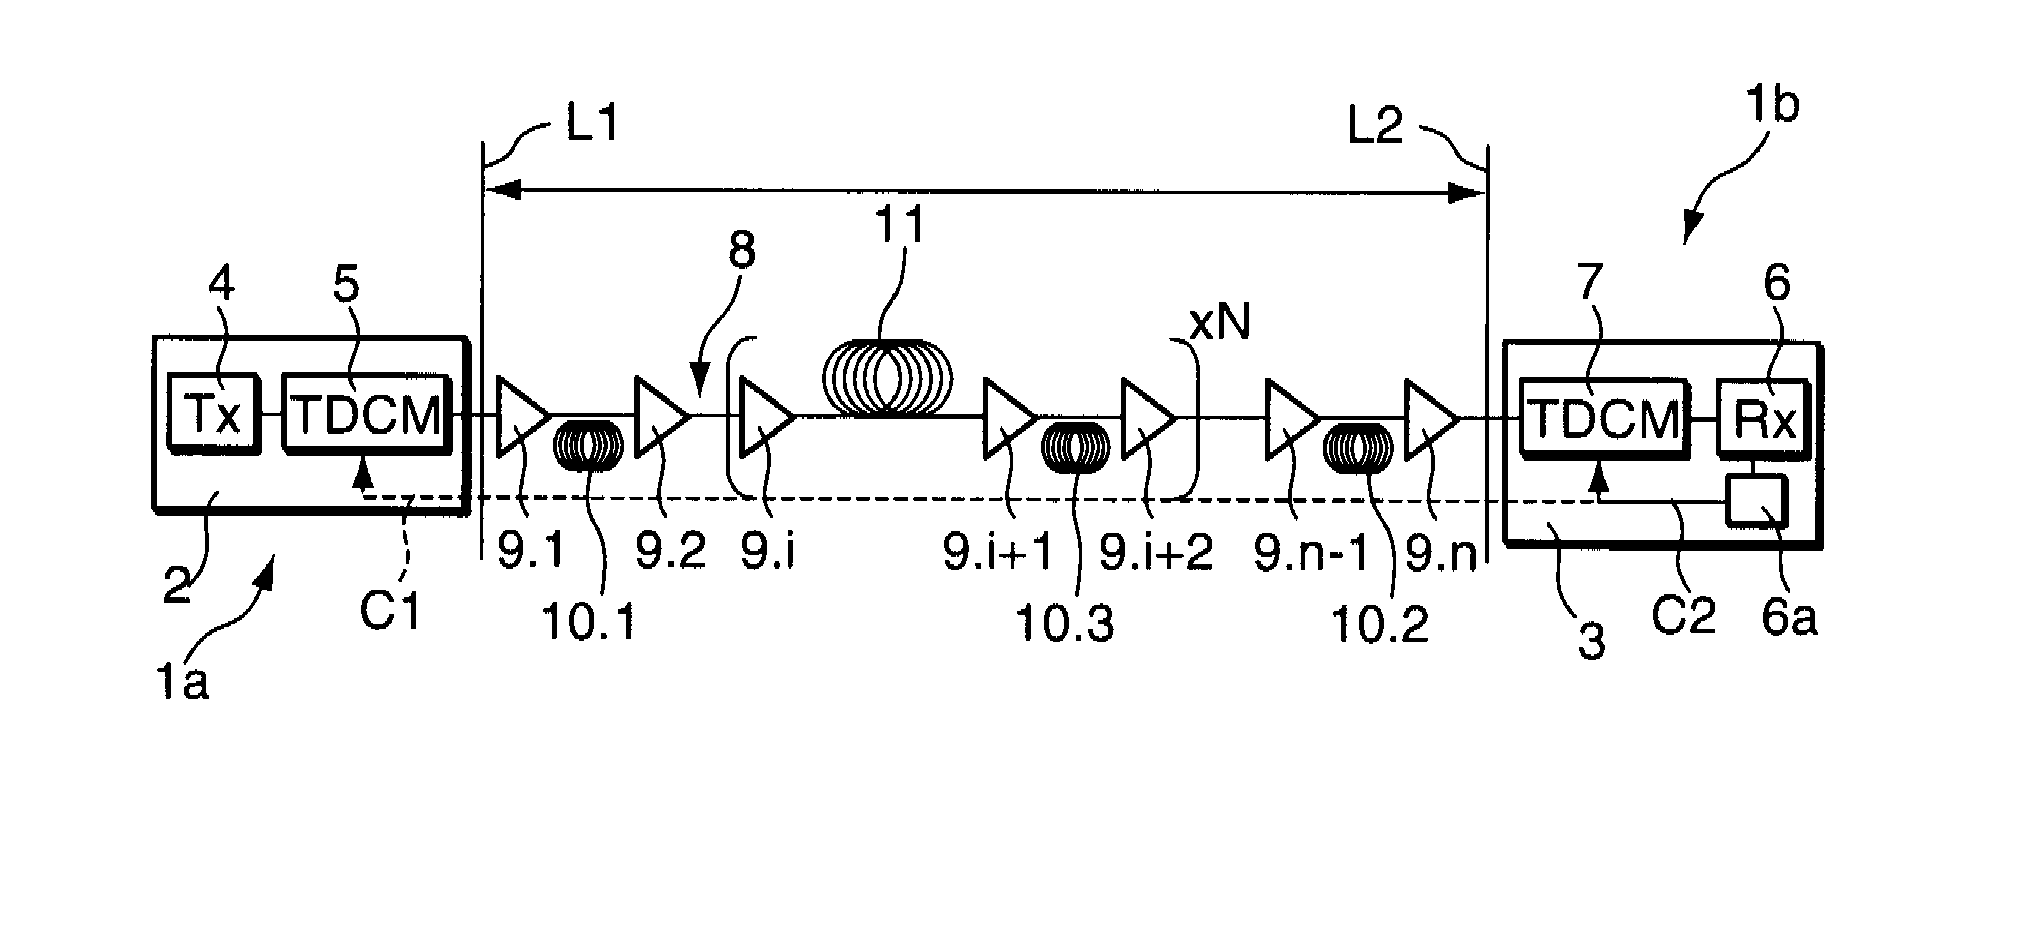 Method of operating and optimising a WDM transmission system and computer program product